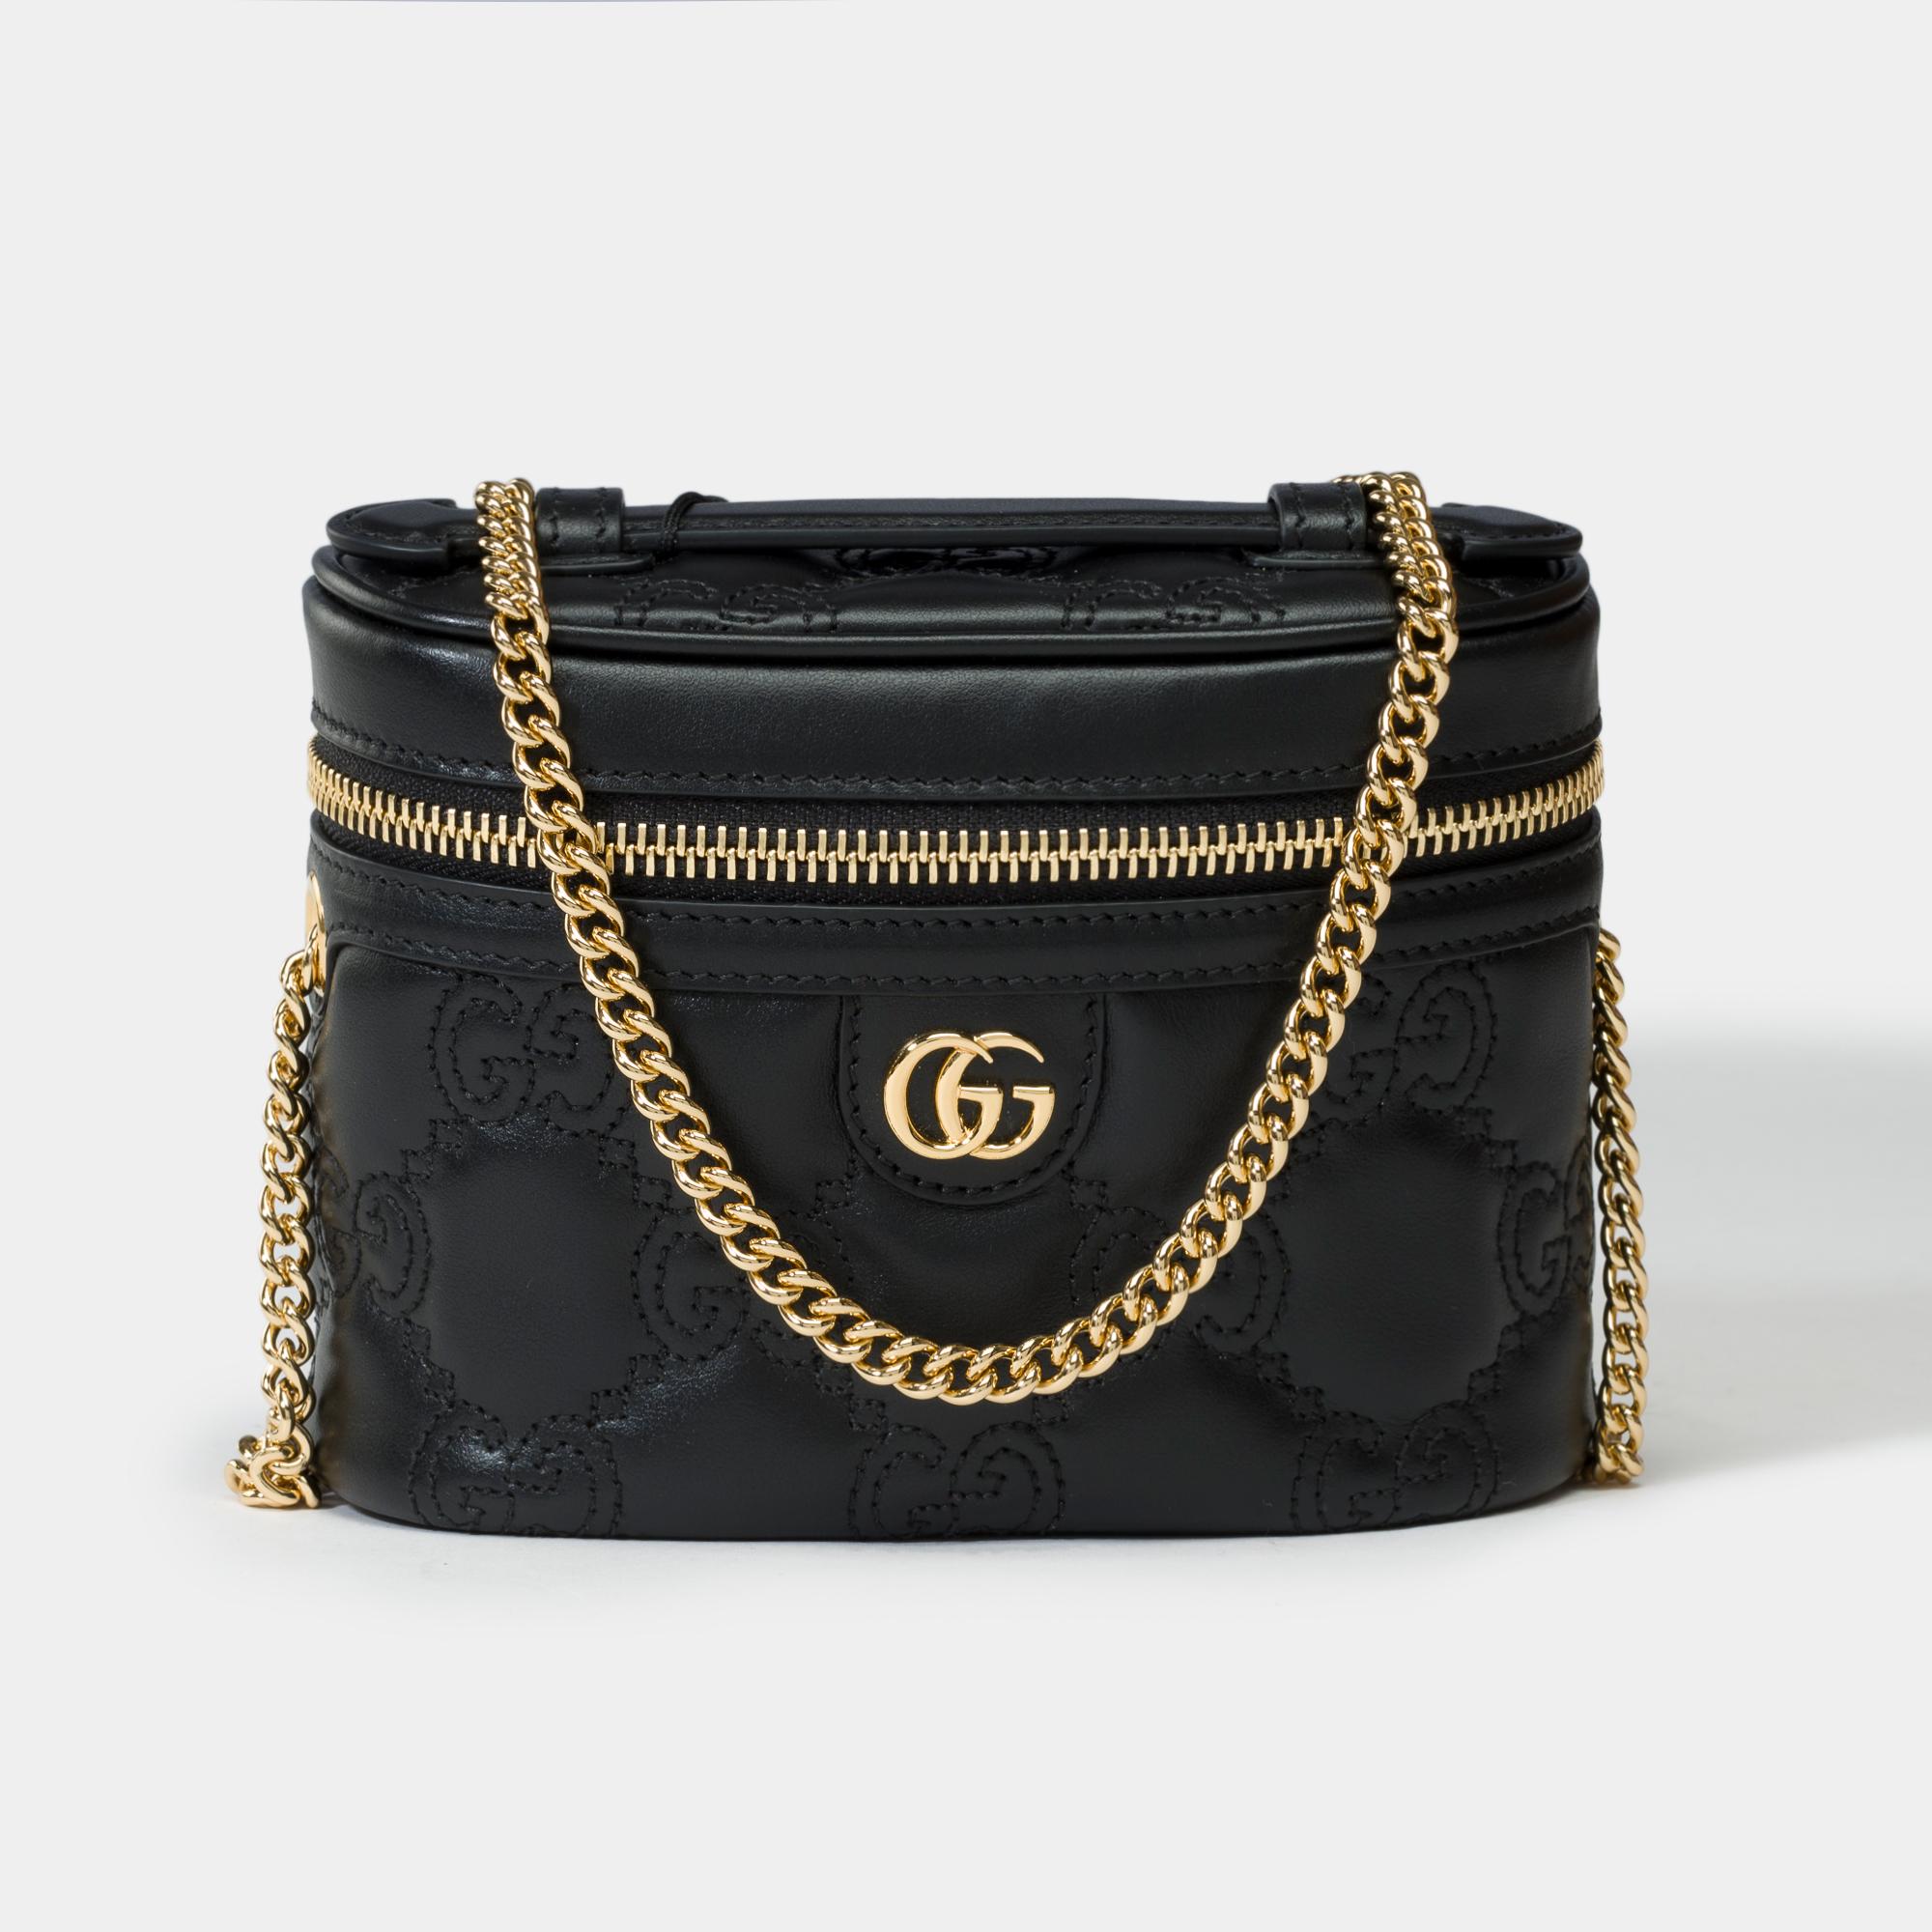 Amazing​ ​Gucci​ ​GG​ ​Mini​ ​shoulder​ ​bag​ ​in​ ​black​ ​quilted​ ​leather,​ ​gold​ ​metal​ ​trim,​ ​chain​ ​handle​ ​in​ ​gold​ ​metal​ ​for​ ​a​ ​hand​ ​or​ ​shoulder​ ​or​ ​crossbody​ ​carry

Quilted​ ​leather​ ​is​ ​an​ ​emblematic​